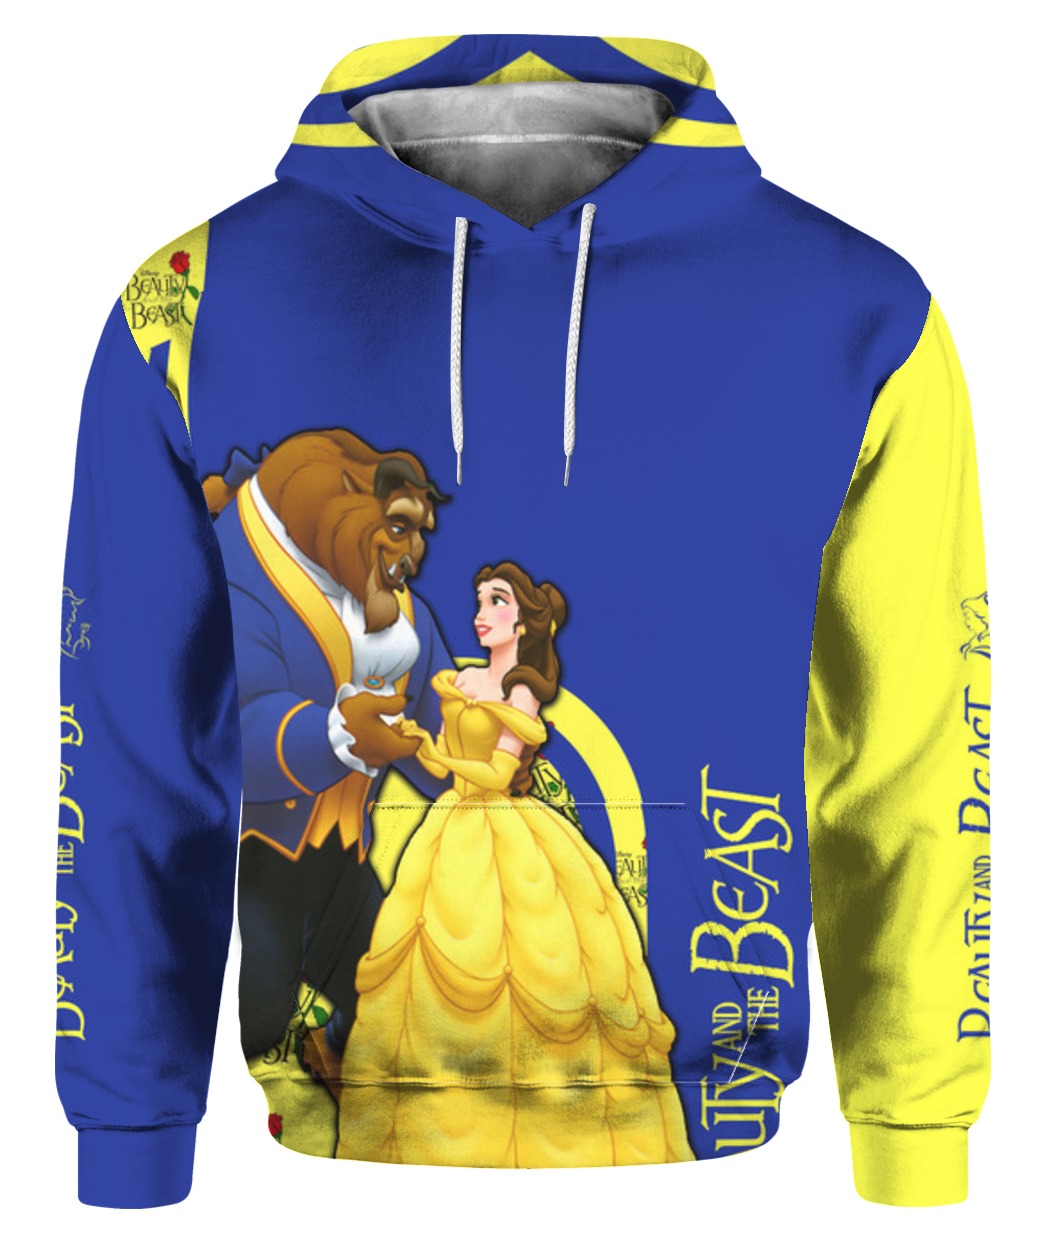 Beauty and the beast full printing hoodie 1